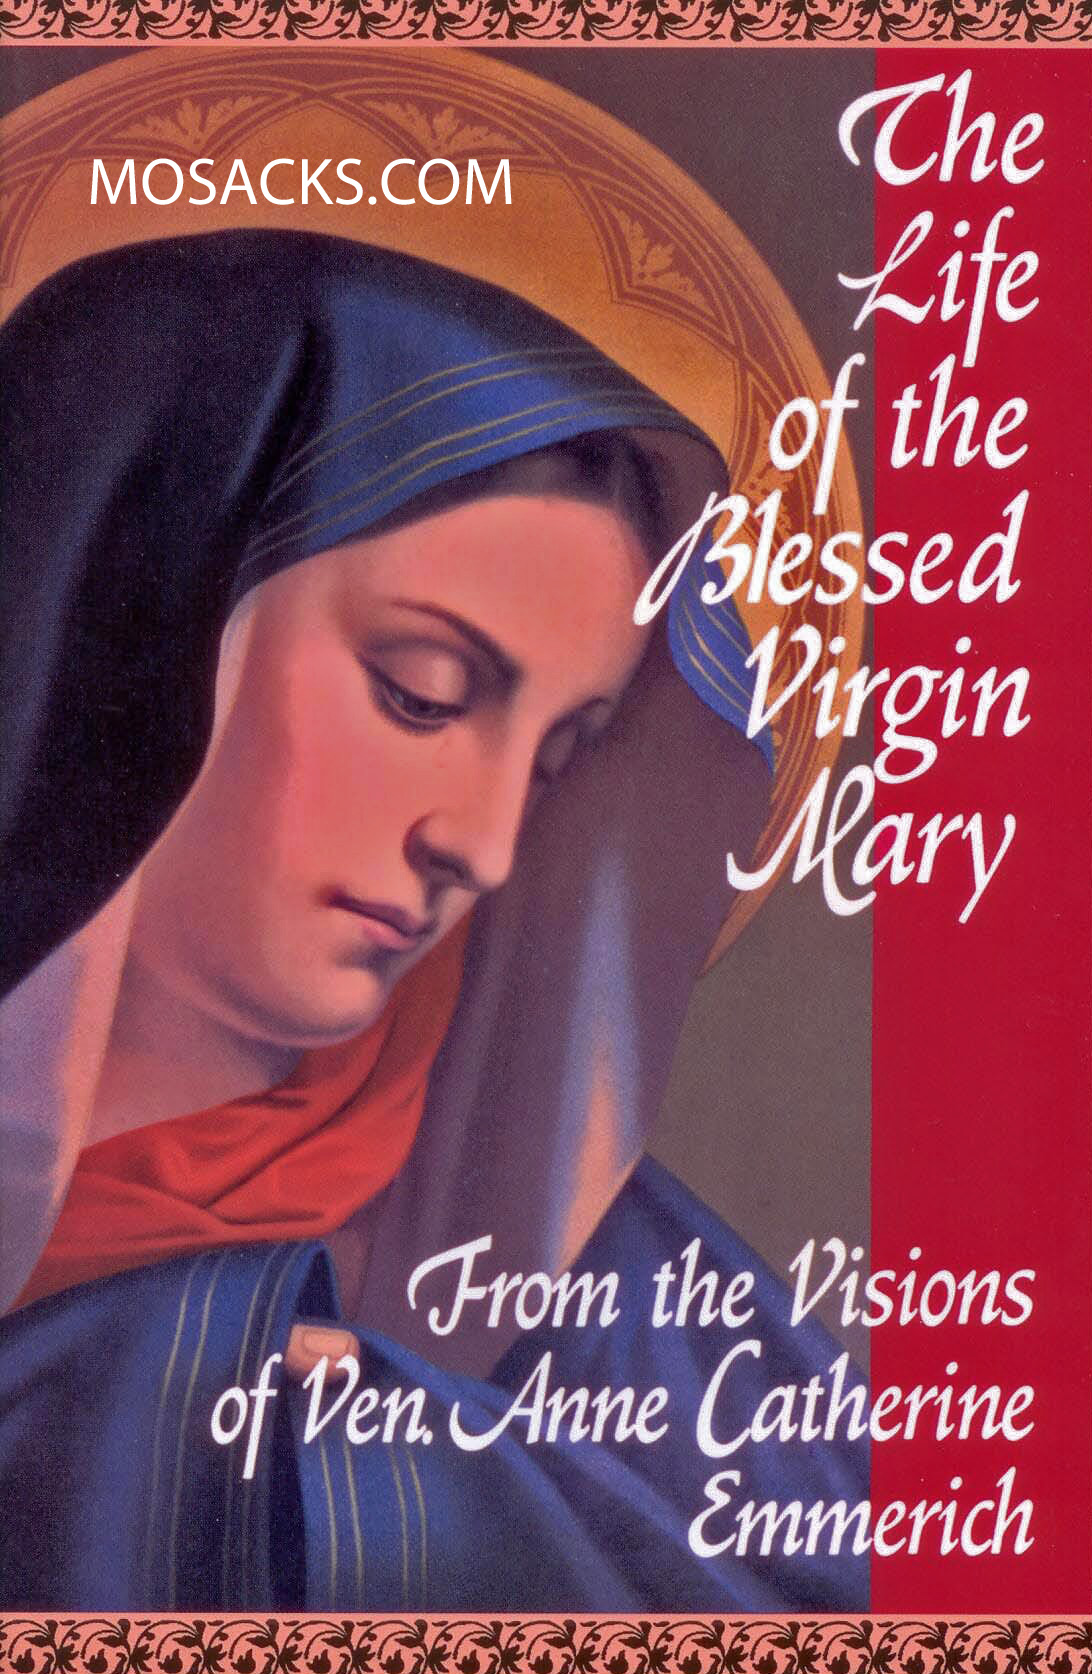 The Life of The Blessed Virgin Mary from Anne Catherine Emmerich